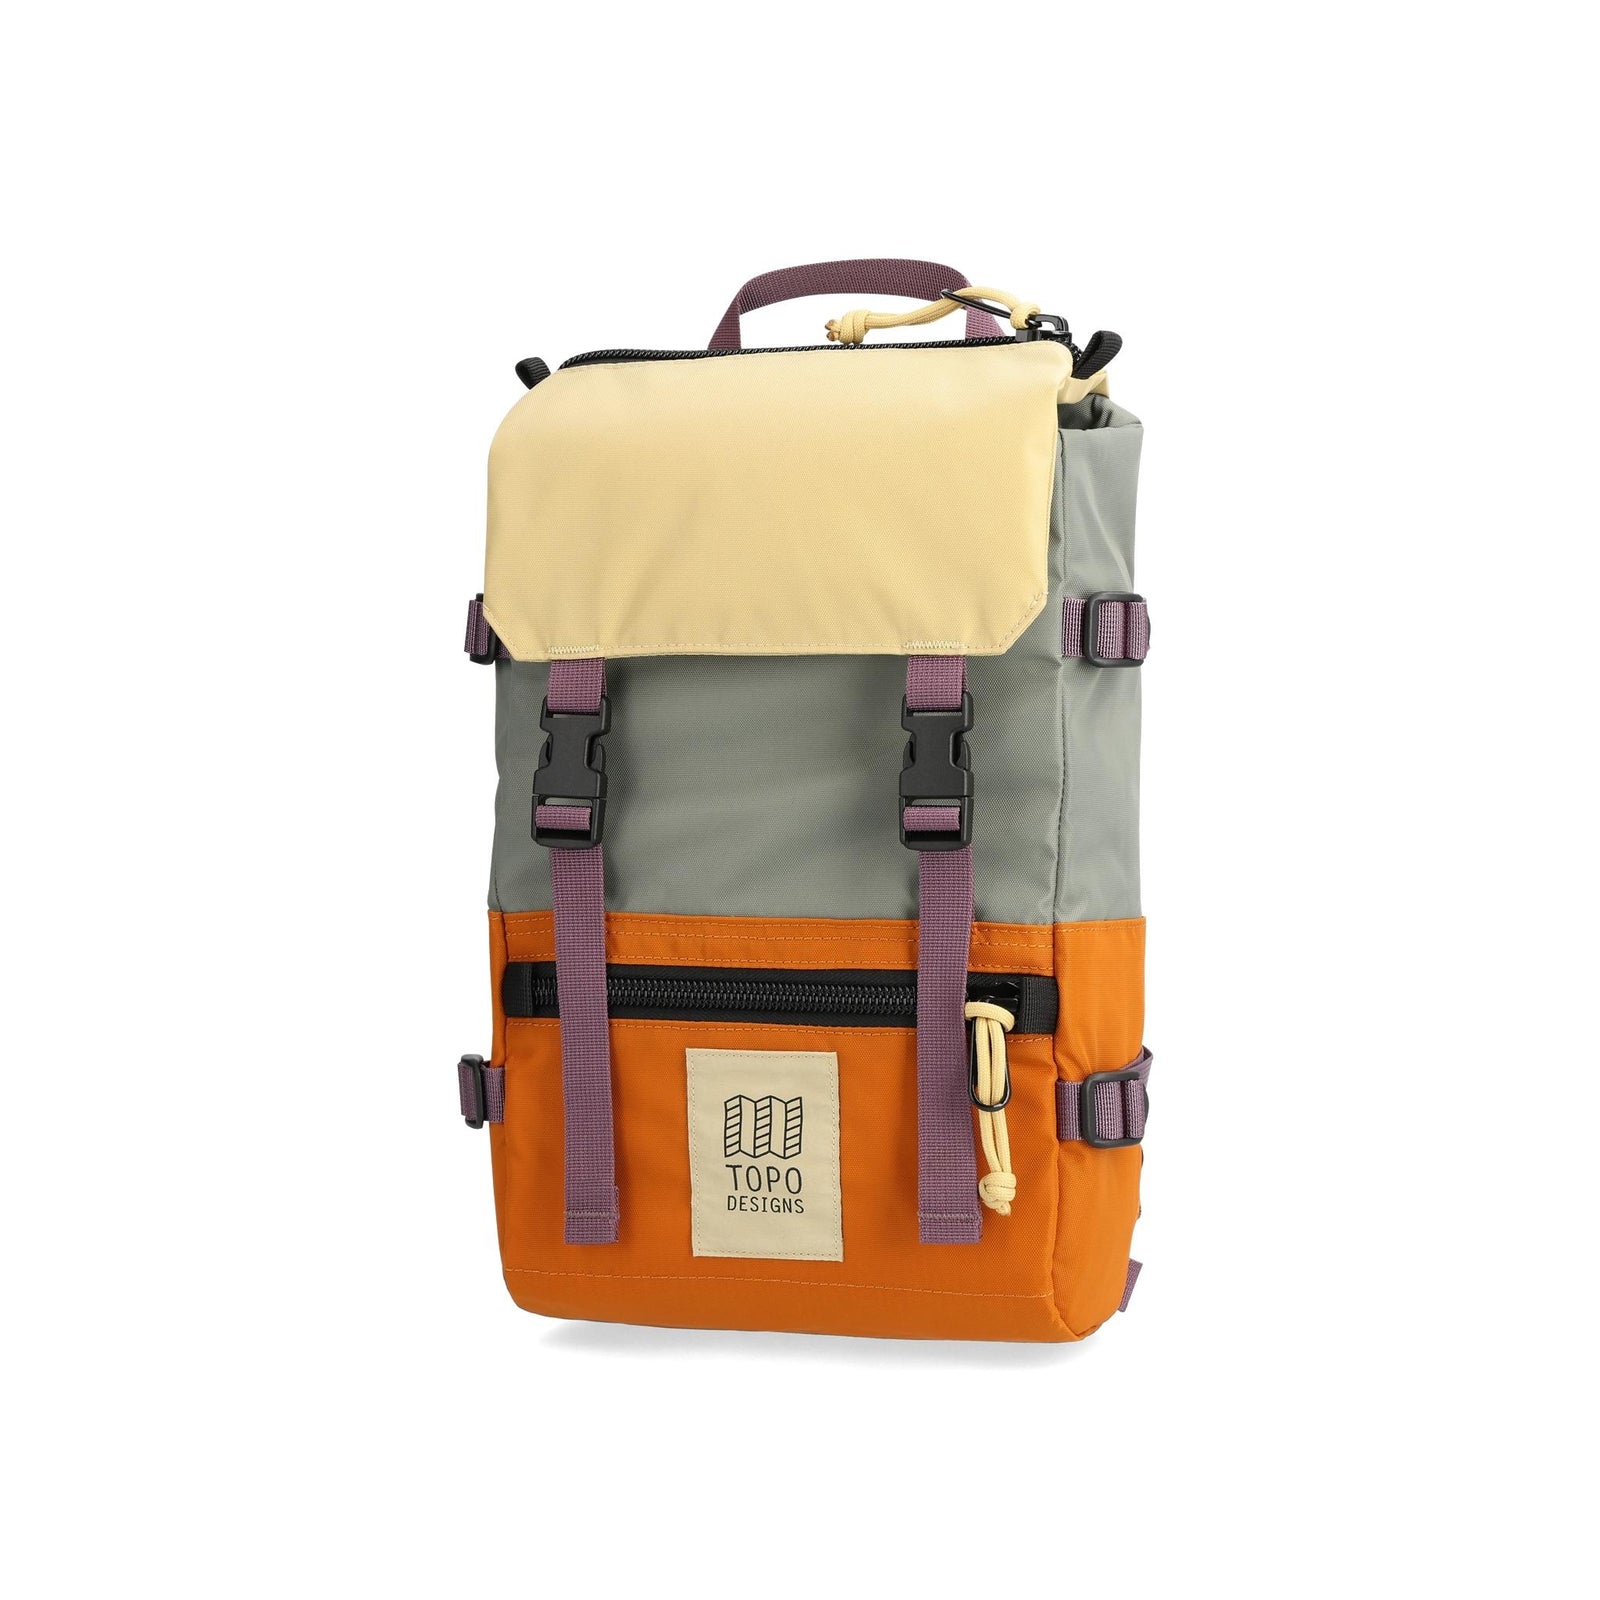 Front View of Topo Designs Rover Pack Mini in "Beetle / Spice"